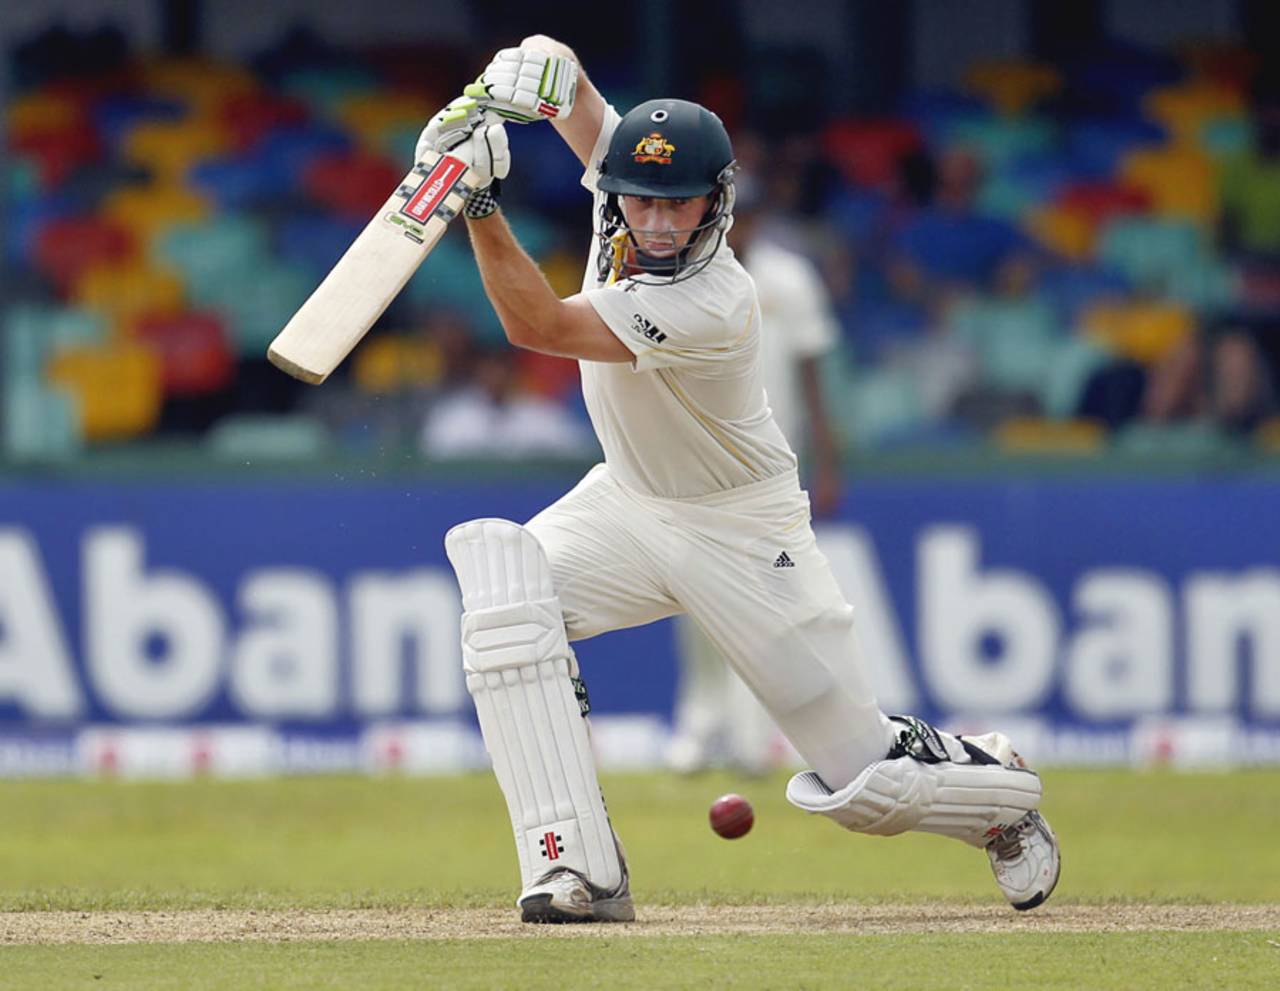 Shaun Marsh could be in for a long tenure in the top order if his fitness can match his talent&nbsp;&nbsp;&bull;&nbsp;&nbsp;Associated Press